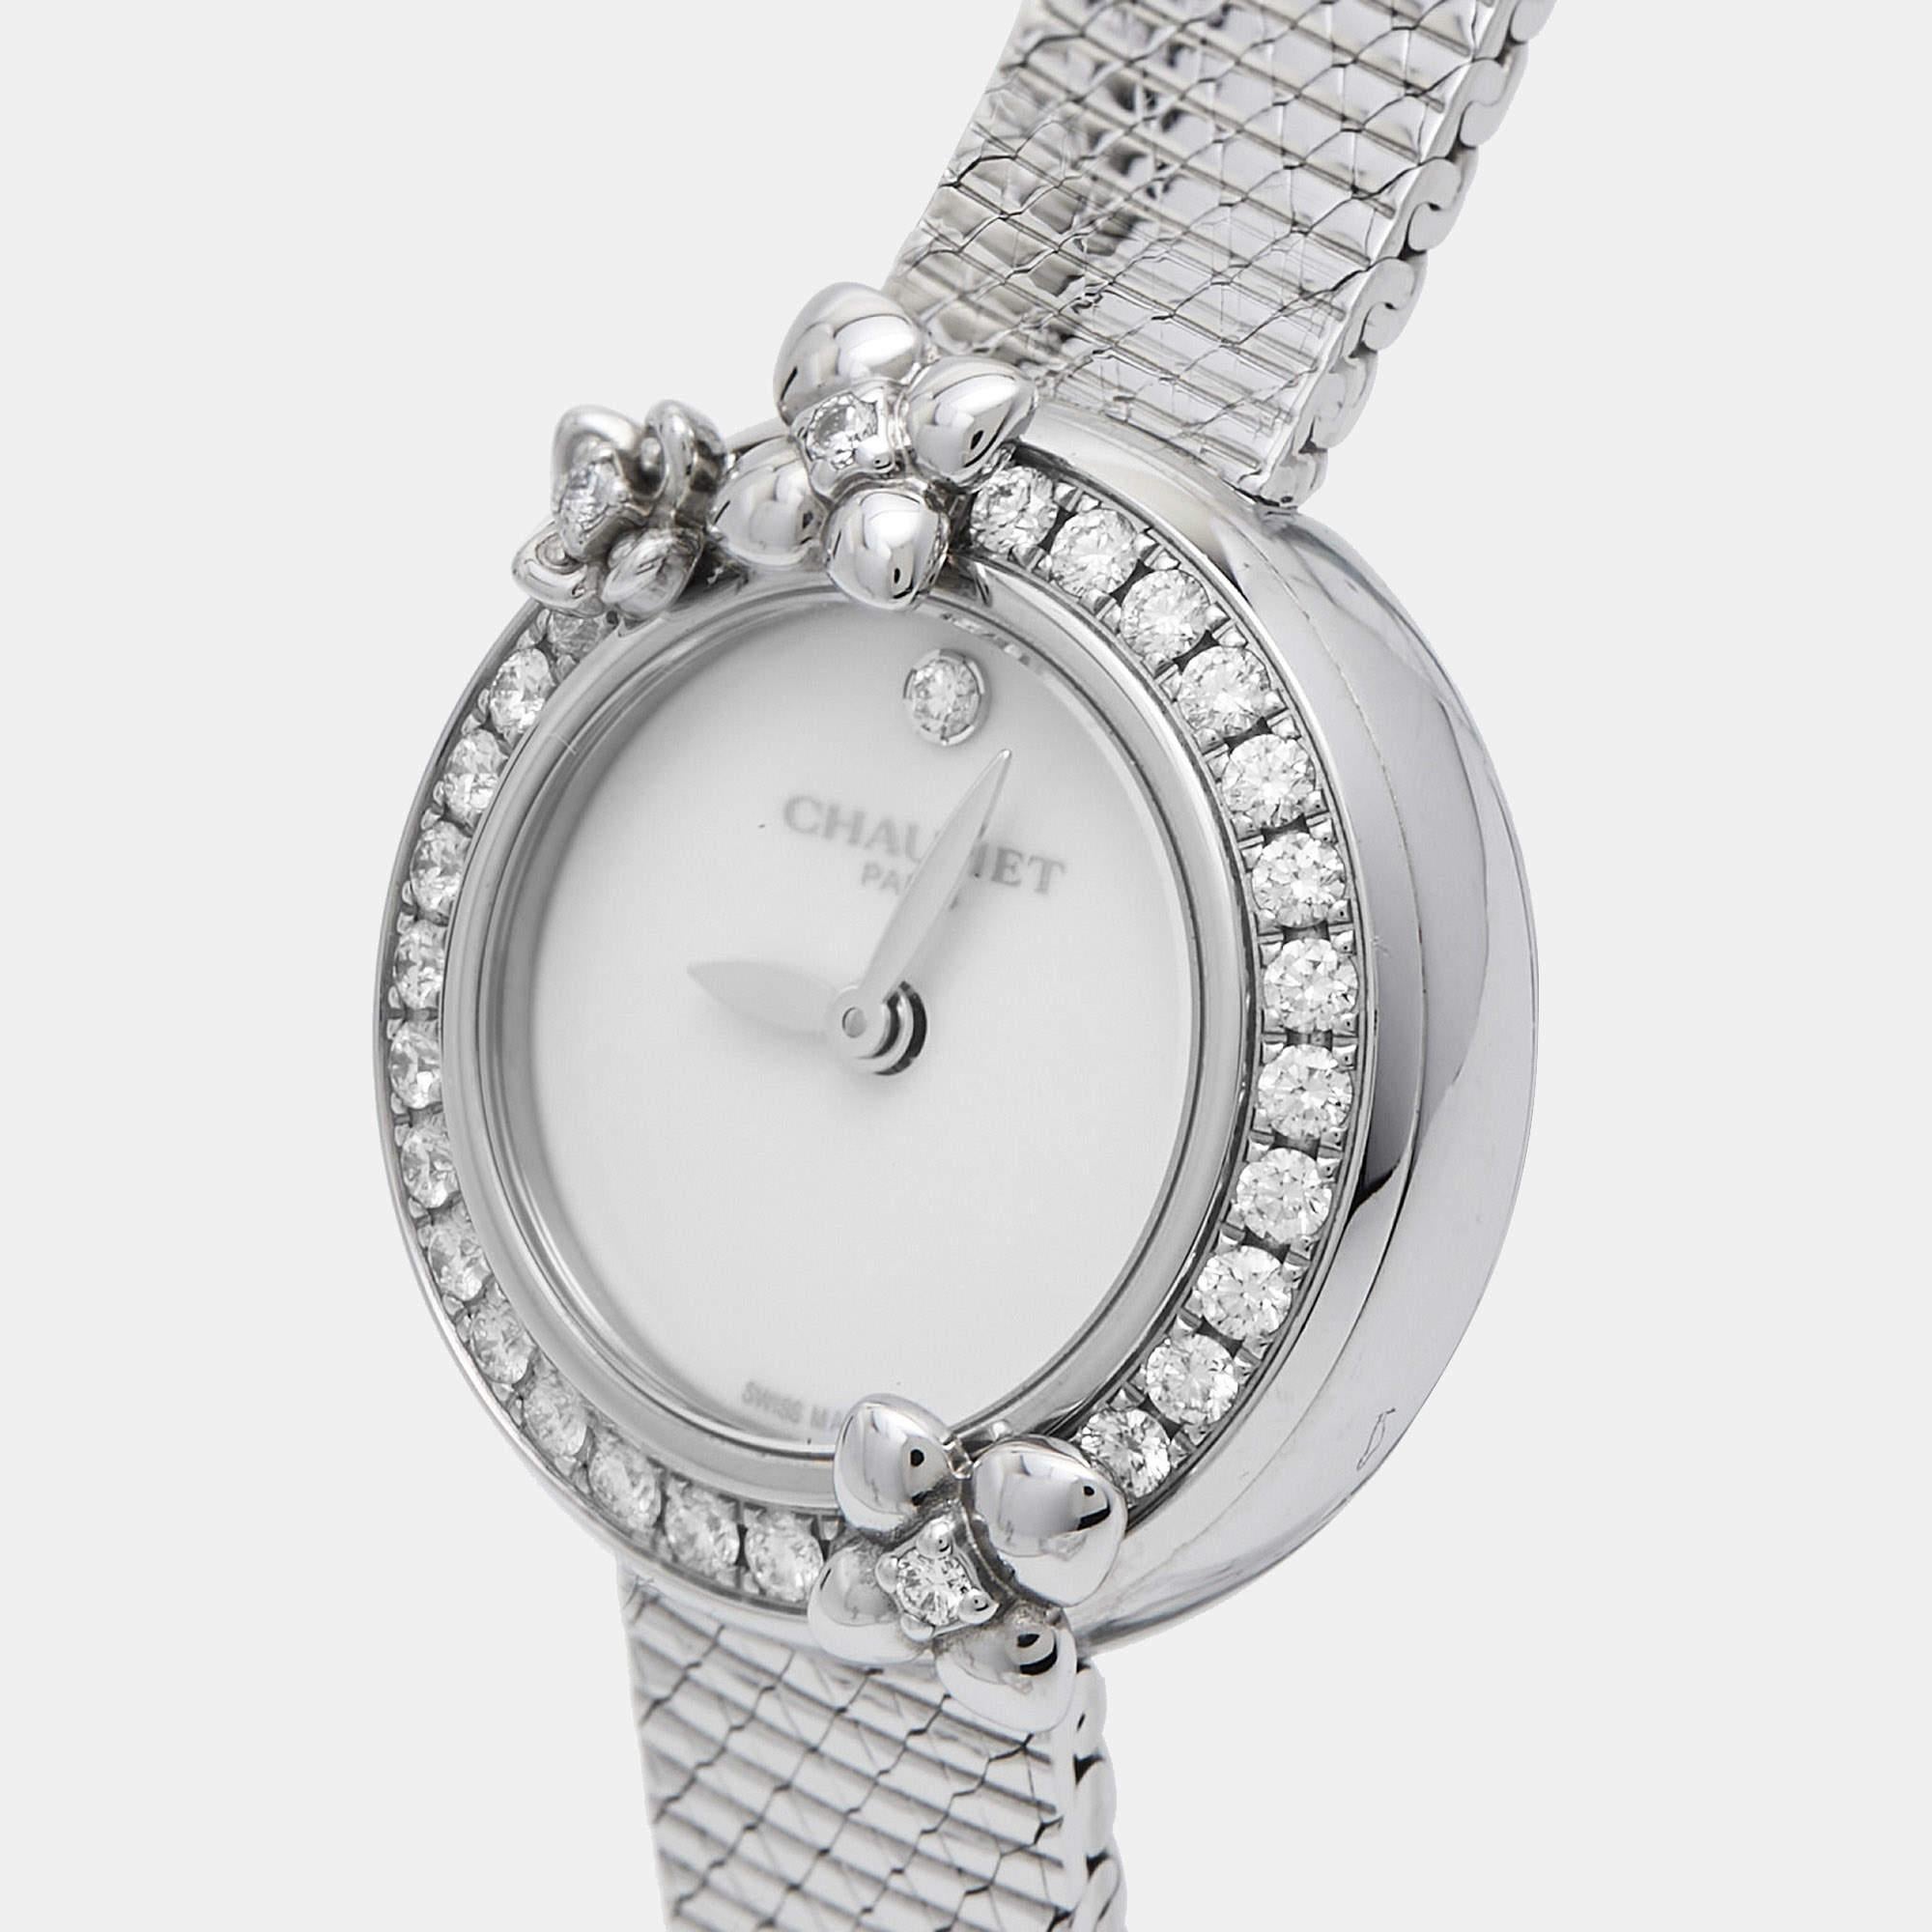 The Chaumet Hortensia is a work of wonder cloaked in dreamy details. The Hortensia W20611-20W watch for women is made of stainless steel, and the round case is laid carefully with diamonds and flower motifs. It aims to evoke the vision of a